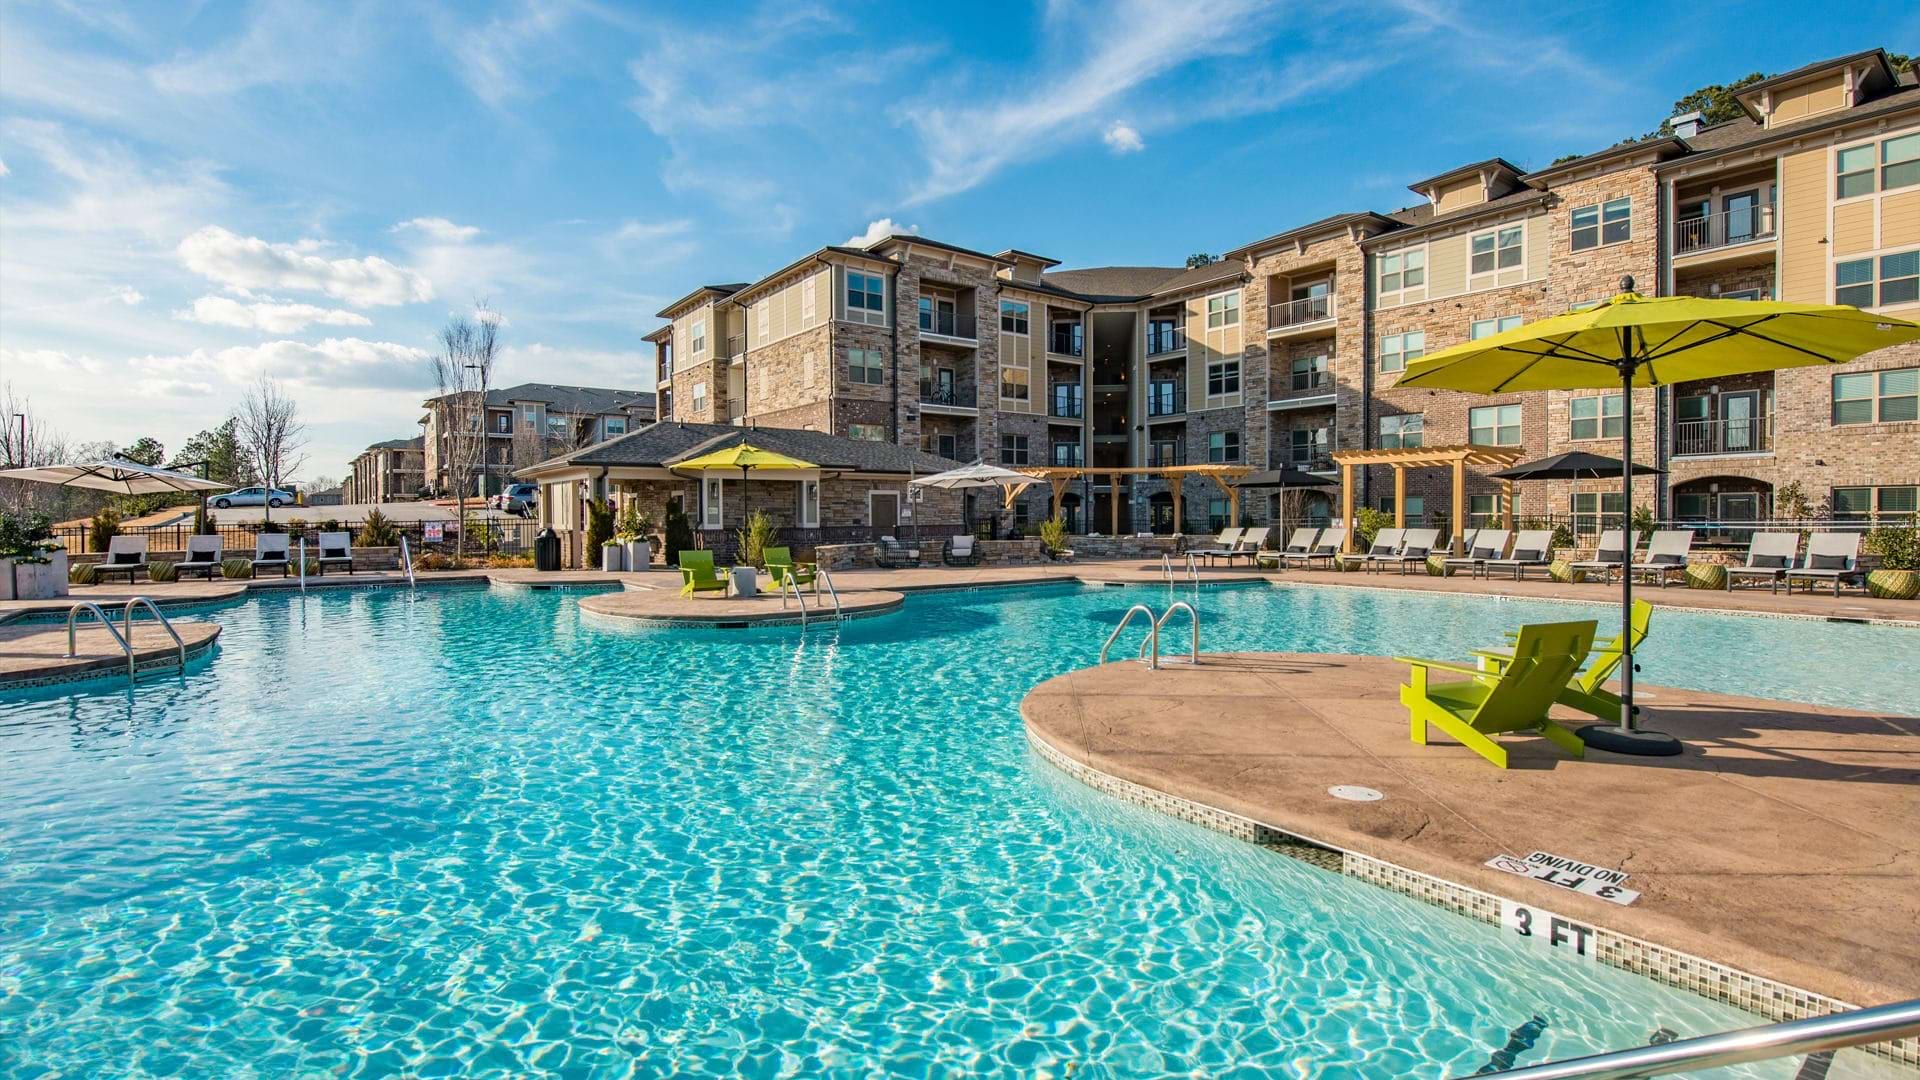 RTP Apartments With Resort-Style Saltwater Pool And Lounging Chairs